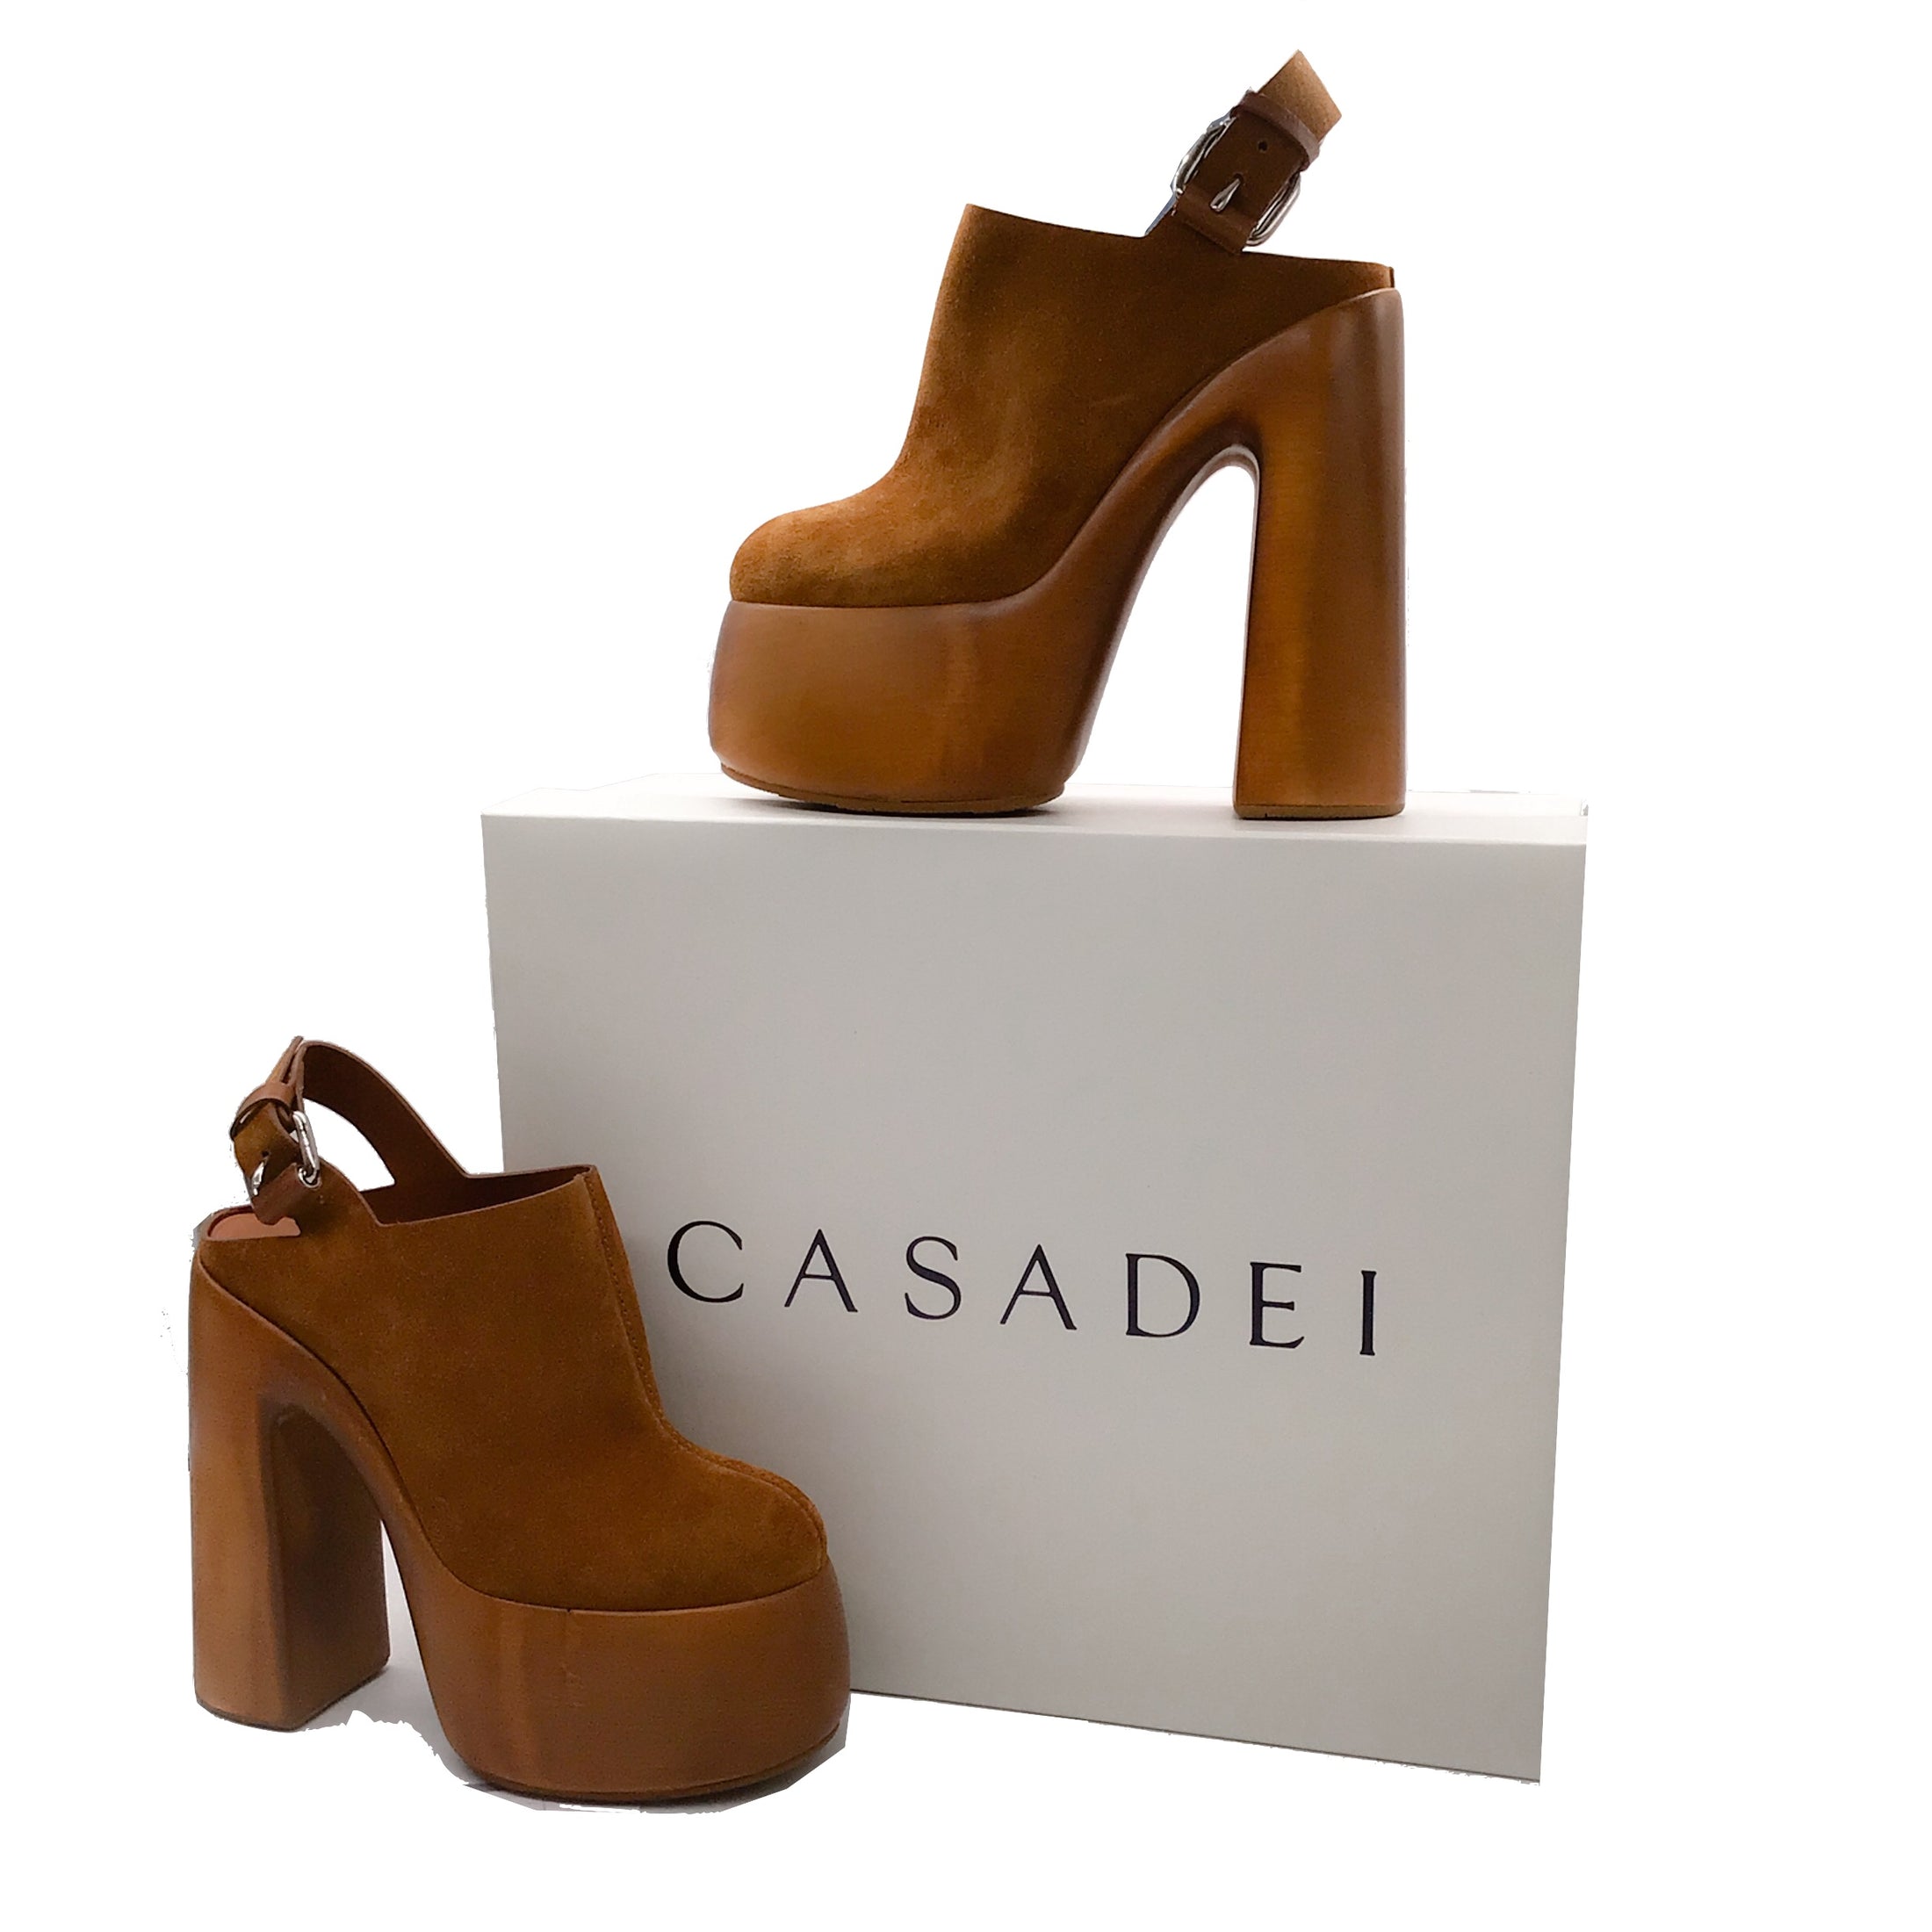 Casadei Brown Kentucky Chunky Wooden Platform Ultra High Heeled Suede Leather Shoes